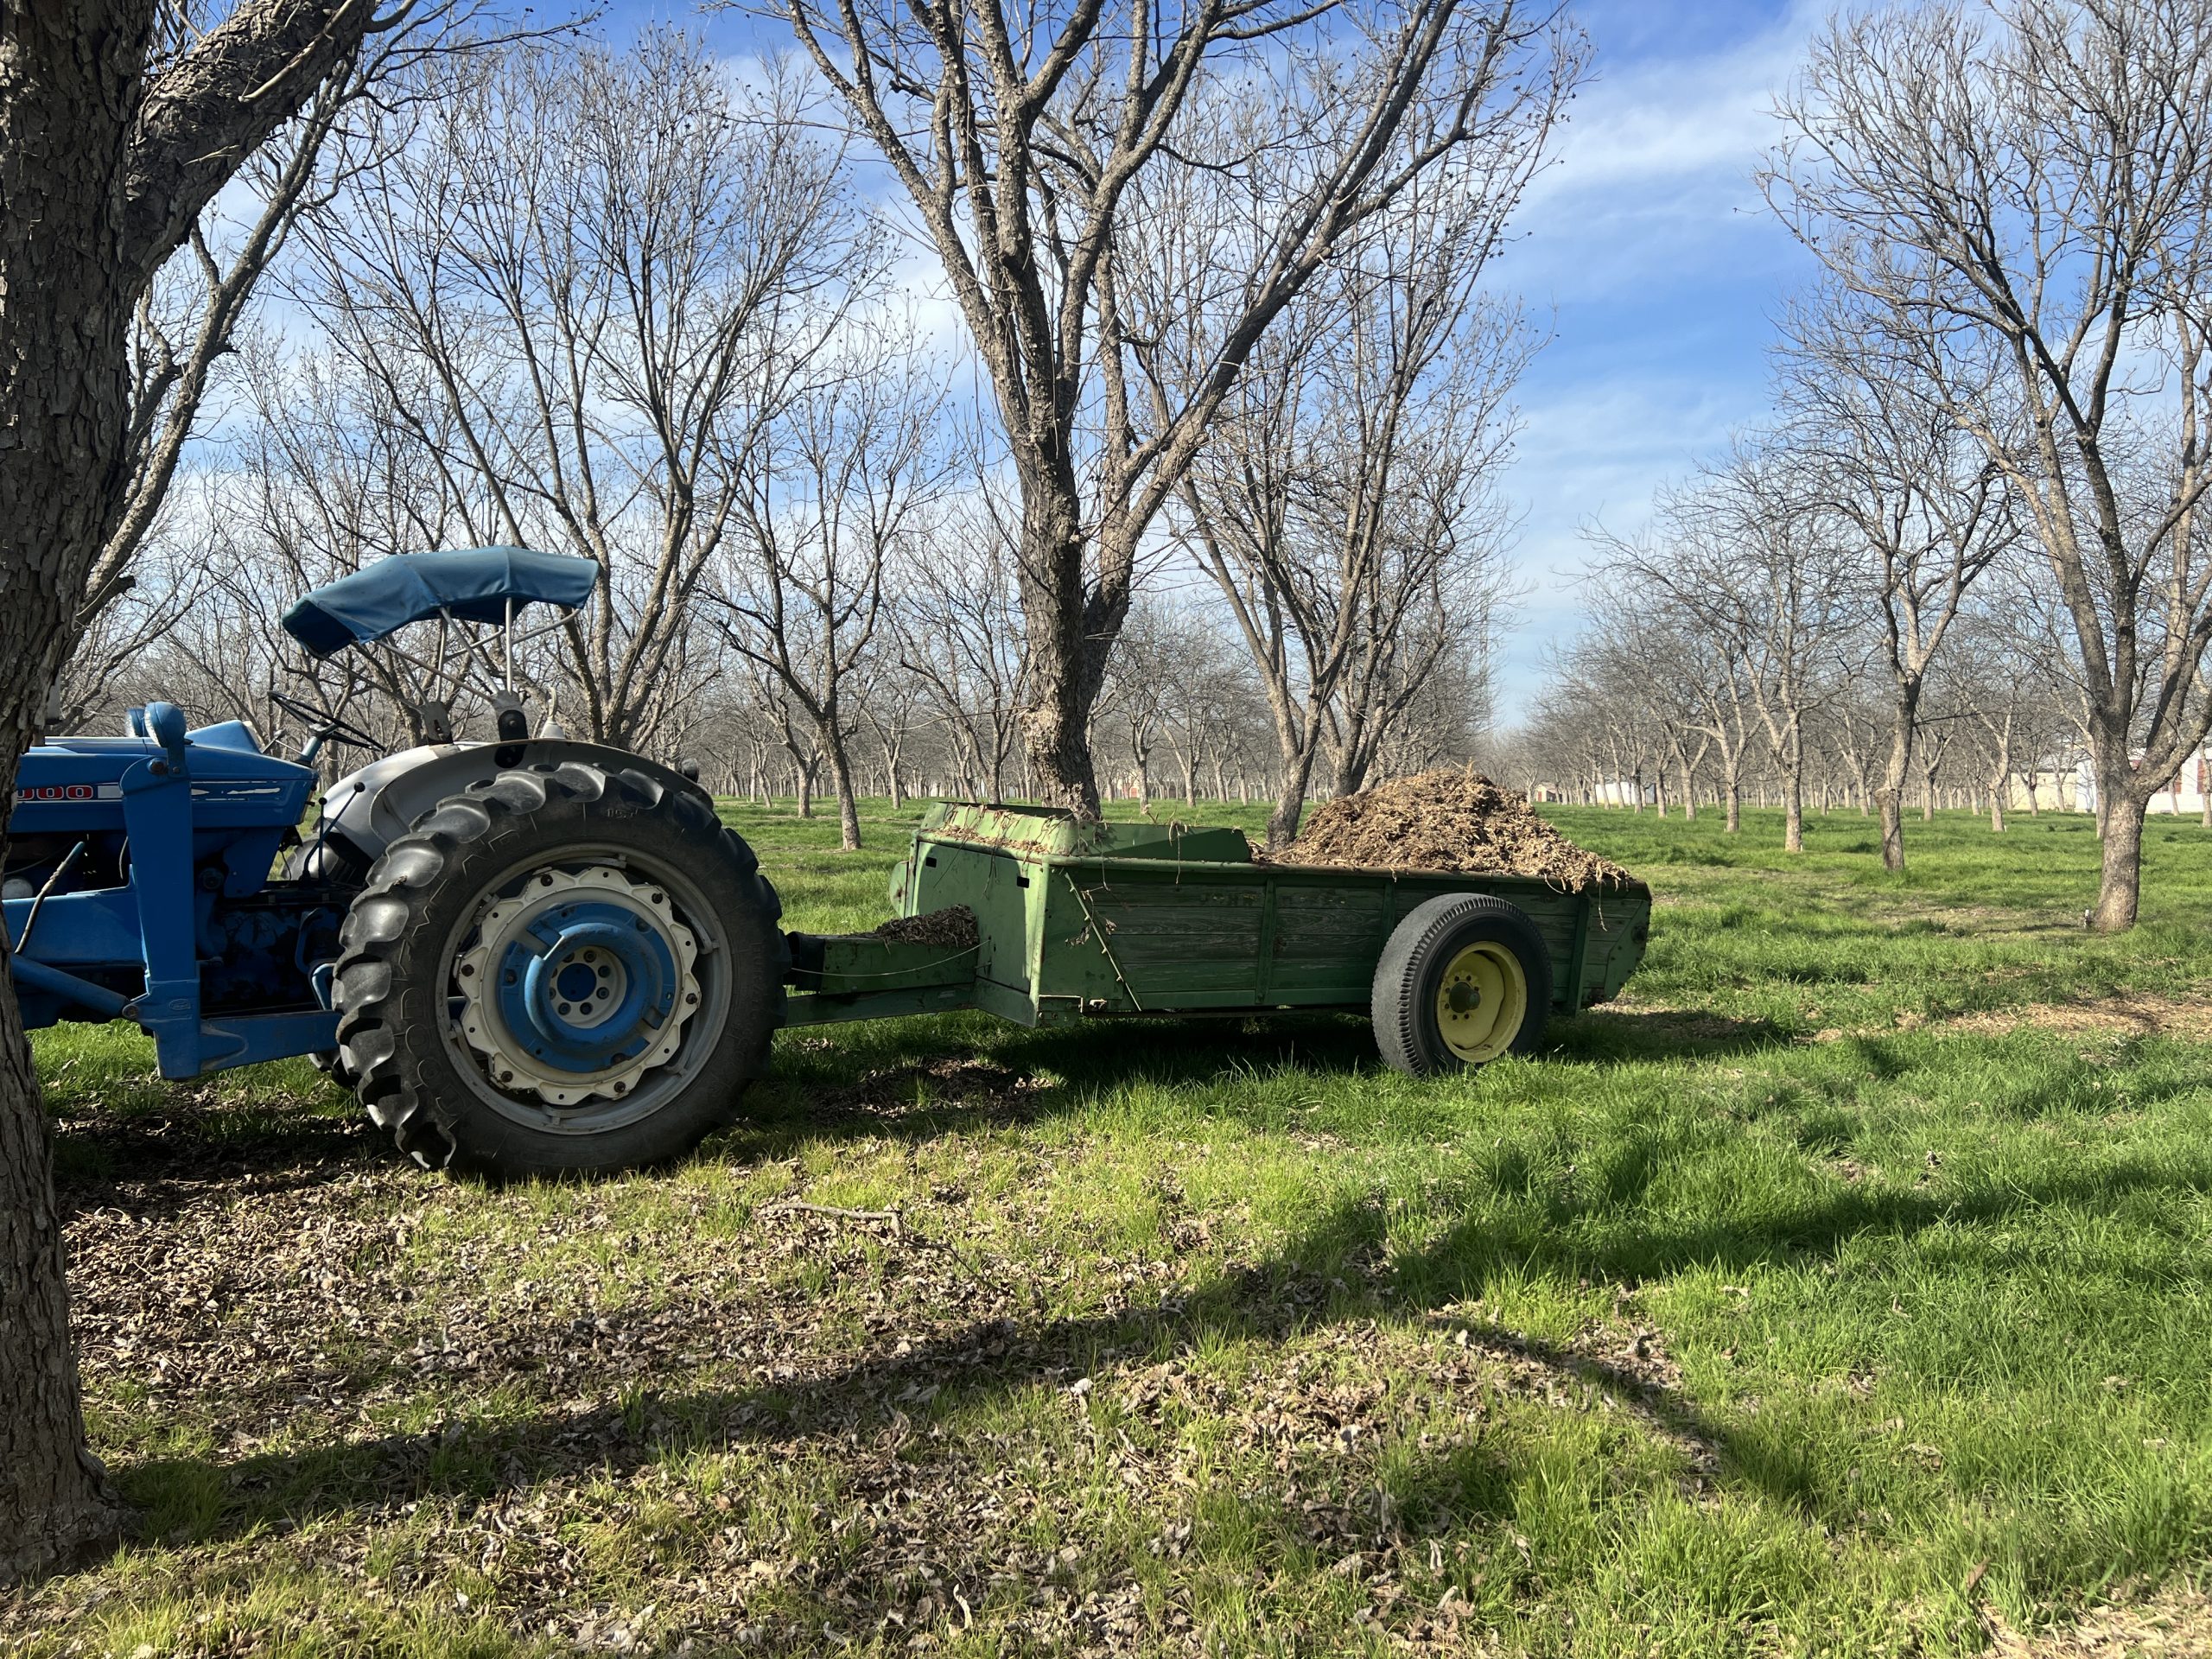 A blue tractor with a green trailer filled with mulch in a pecan orchard.